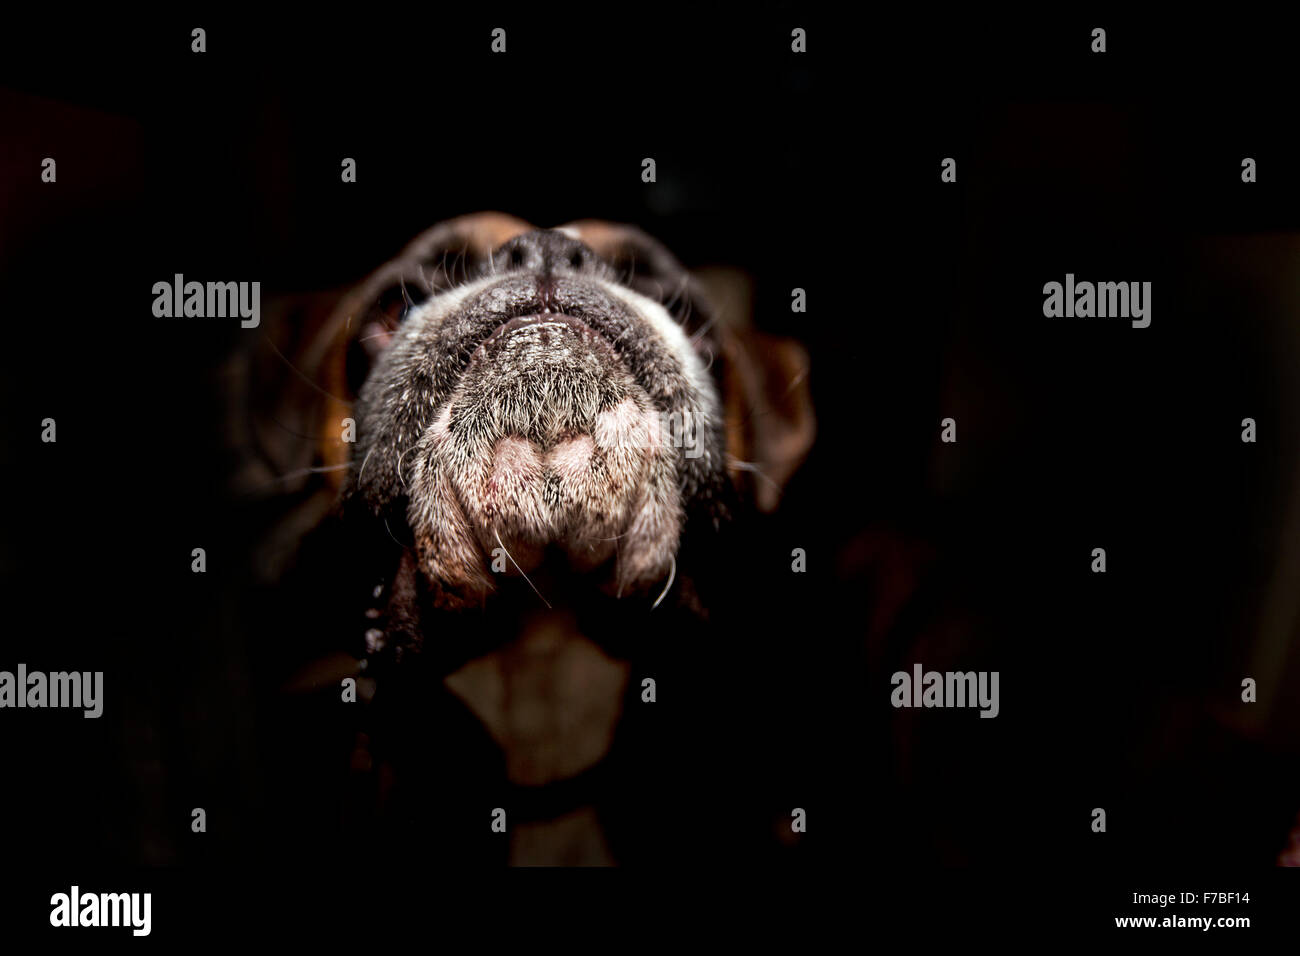 Boxer dog chin and nose head up in darkness Stock Photo